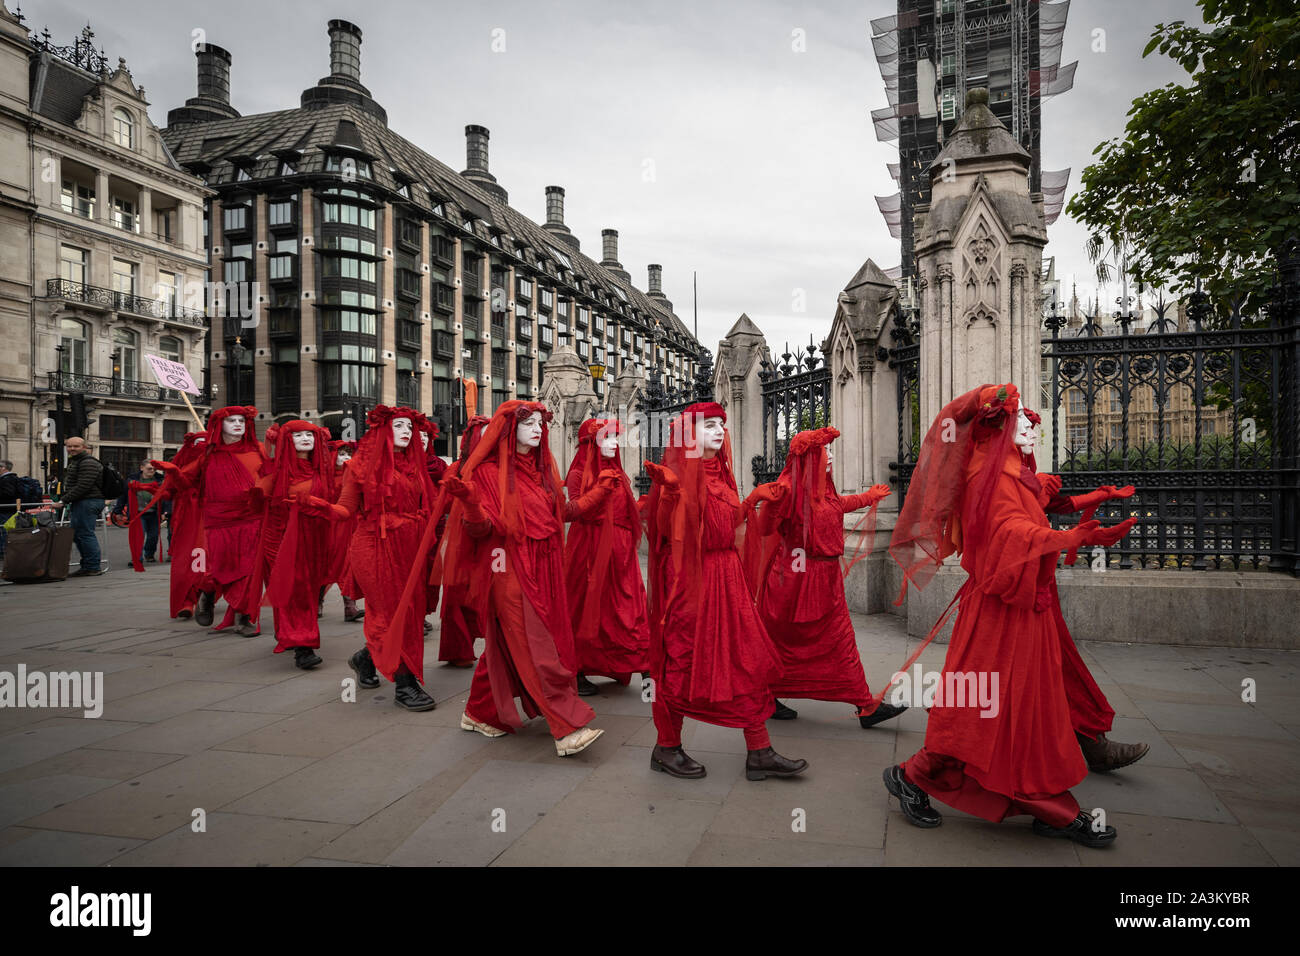 Extinction Rebellion's 'Red Rebel Brigade' arrive in Westminster in their trademark blood red outfits to join the protests. The environmental campaigners begin a new wave of protest action this morning causing disruption at key sites in London, UK. Stock Photo